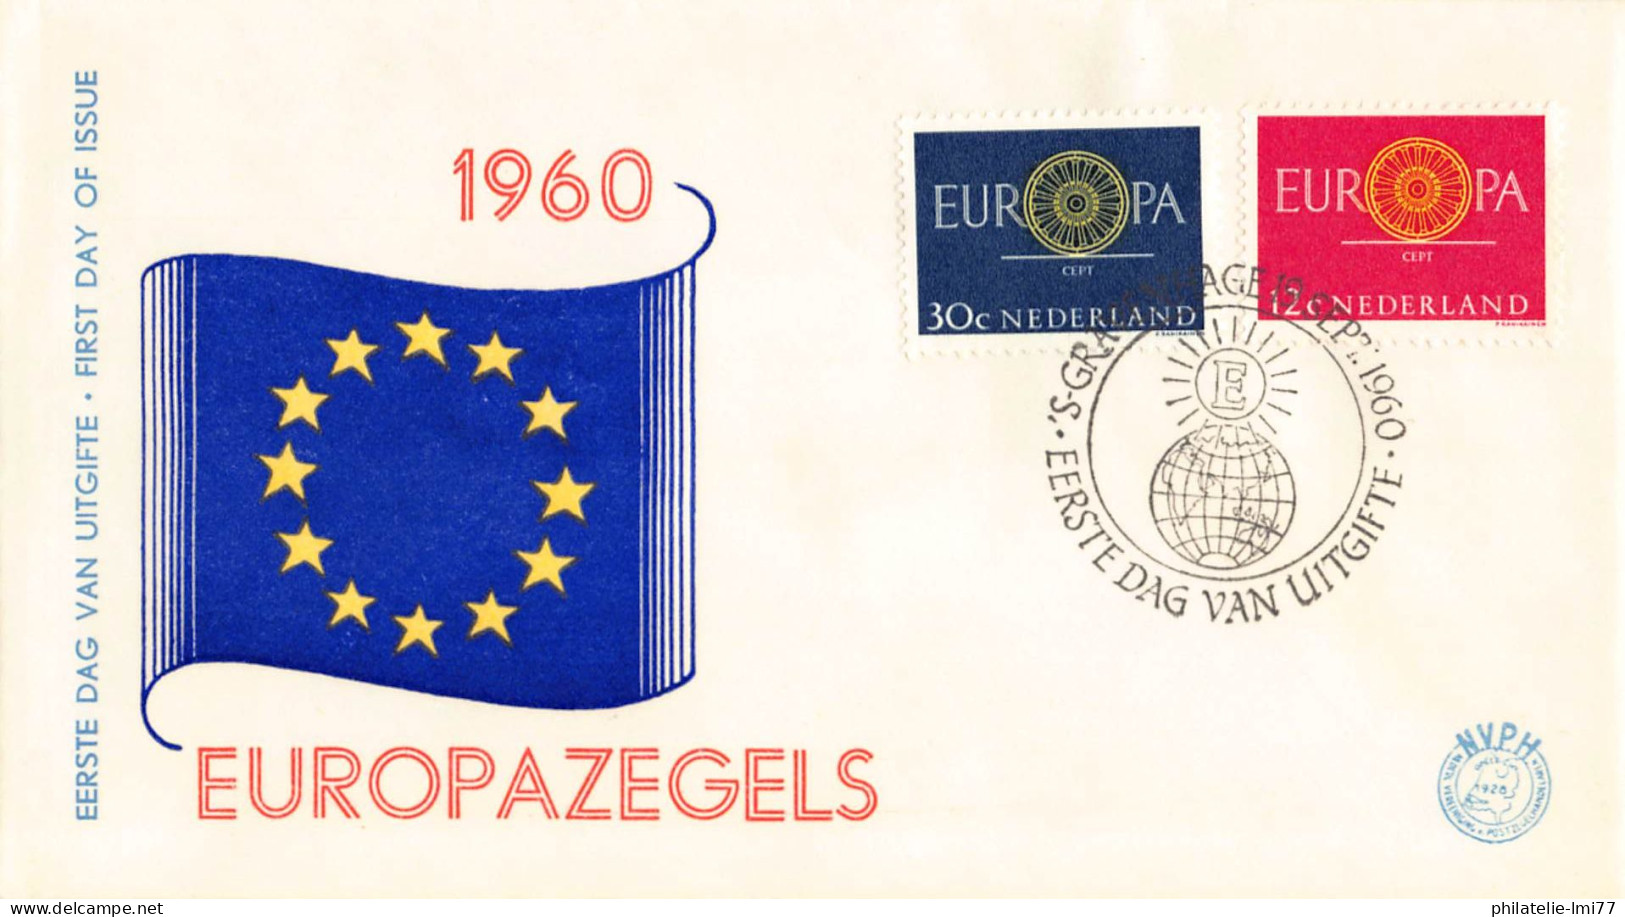 Pays-Bas - FDC Europa 1960 - 1960